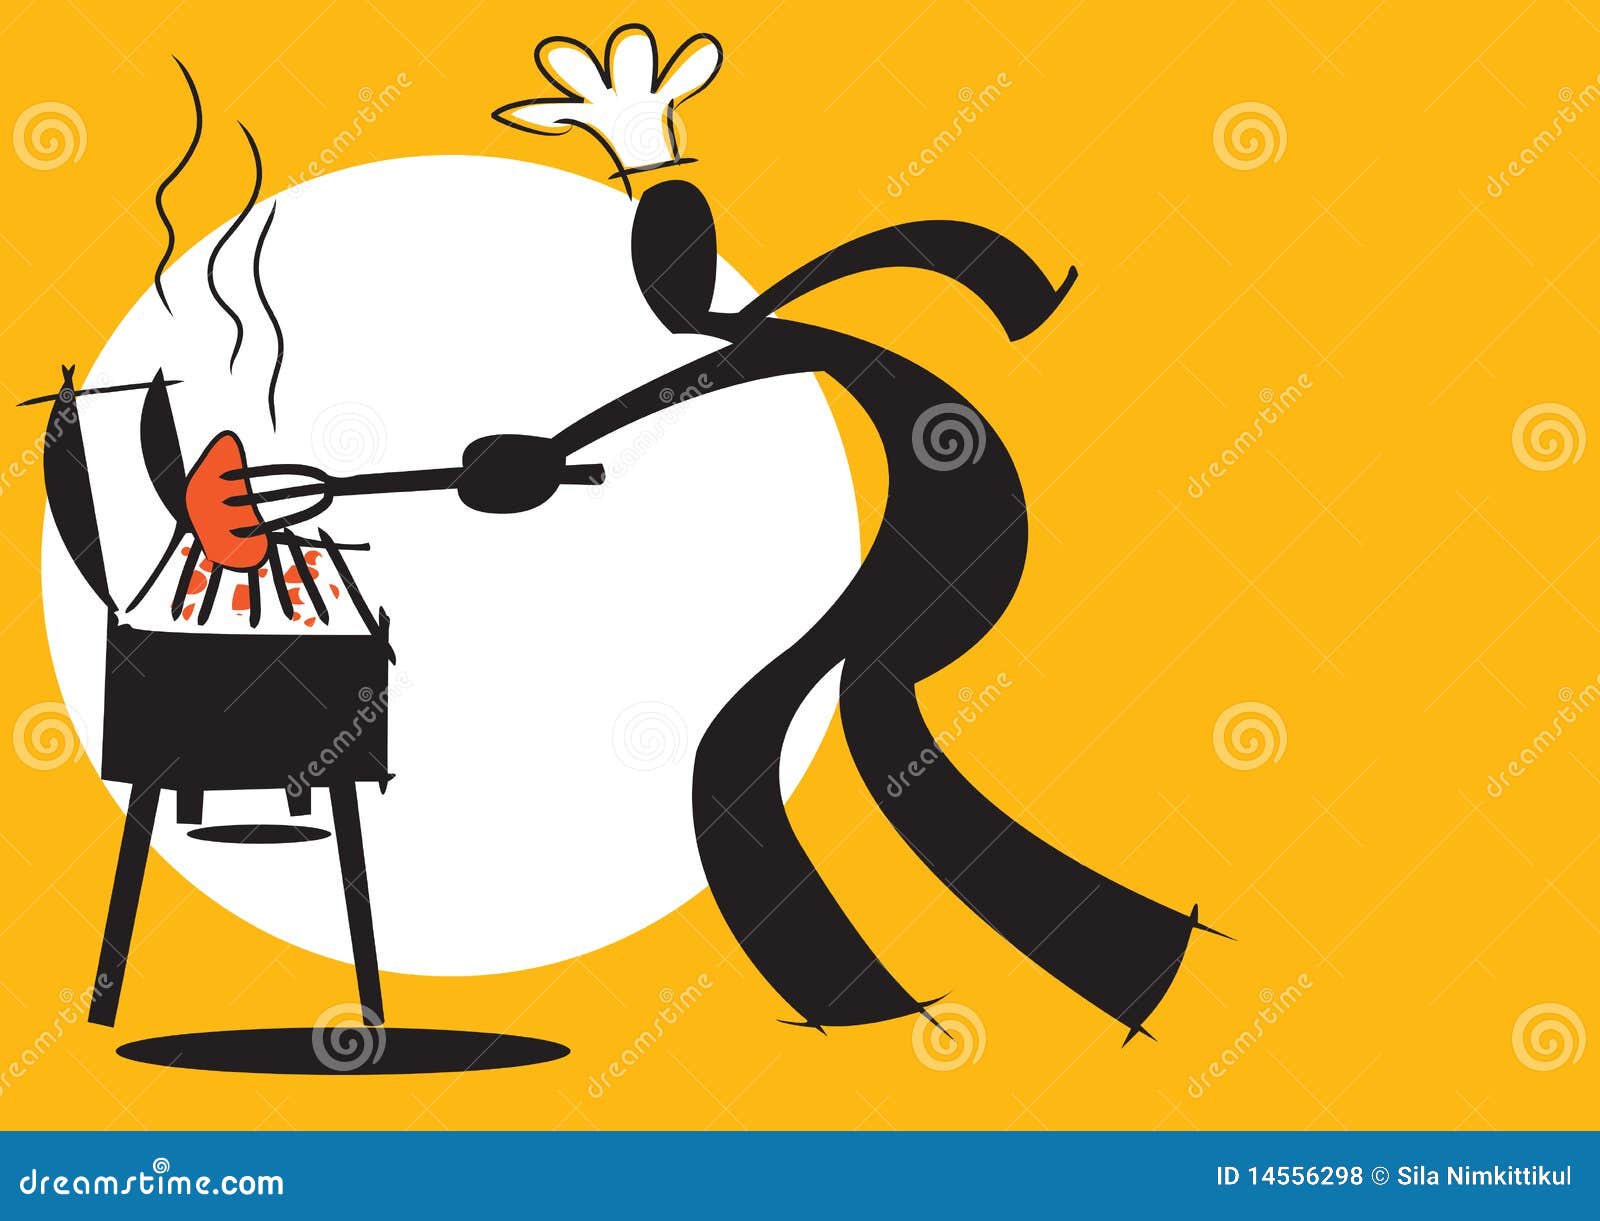 Shadow Man Cooking Barbecue Stock Vector - Illustration of ladleful ...